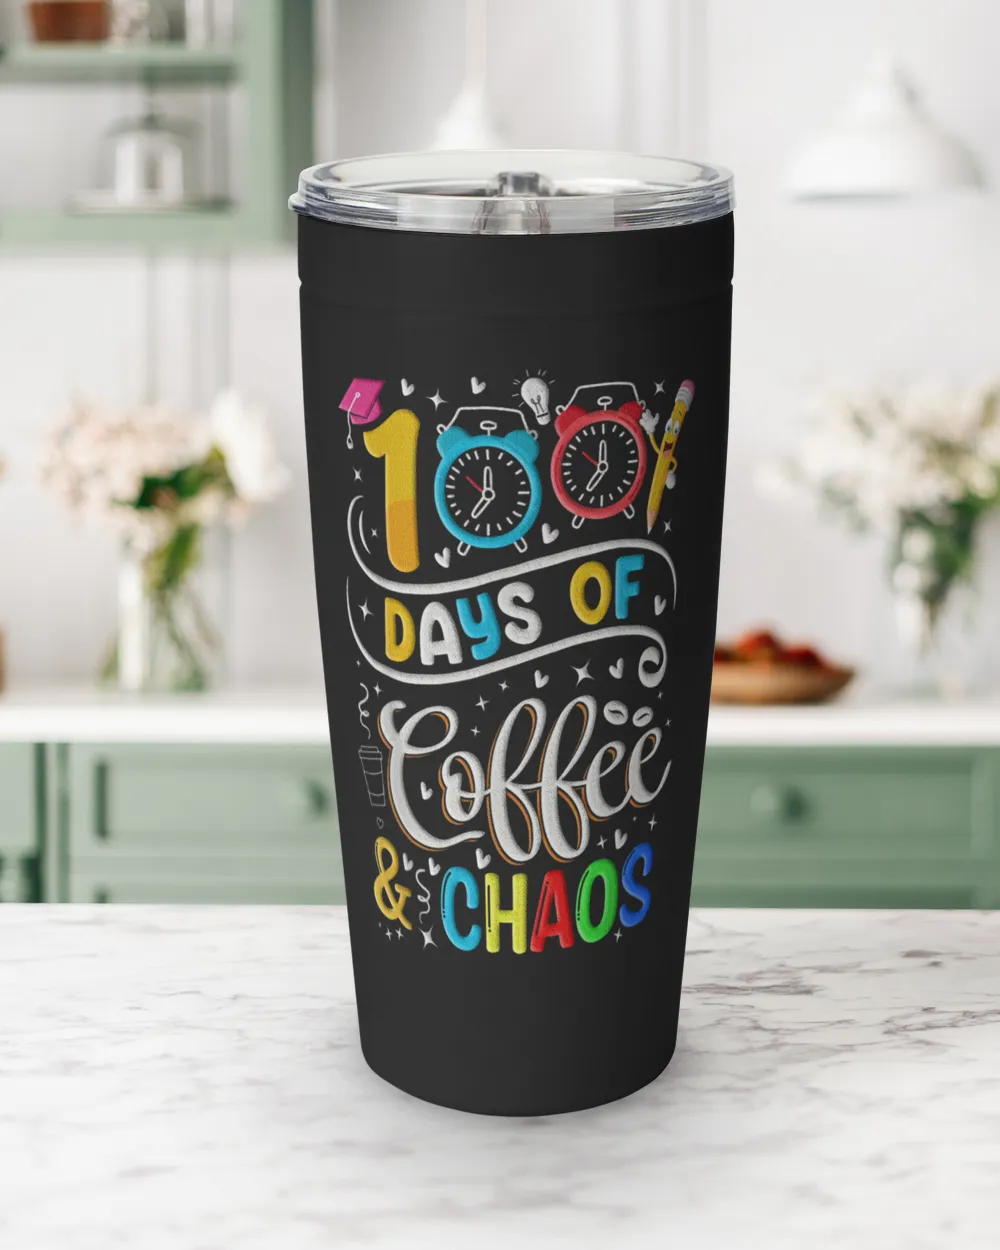 100 Days Of School Coffee And Chaos 100Th Day Of Teachers